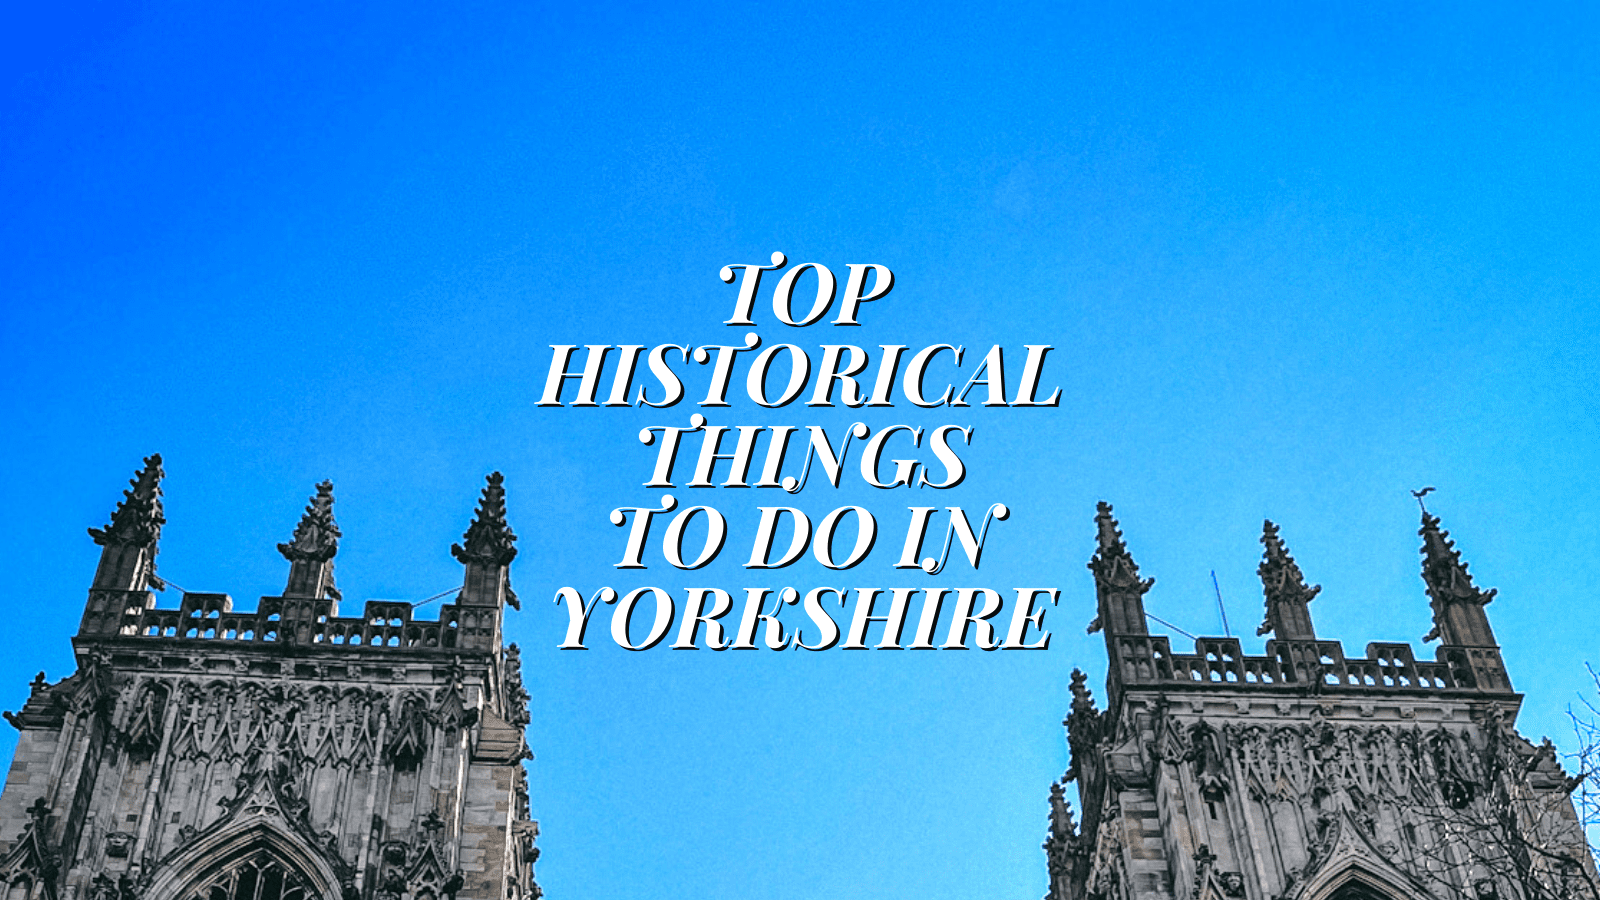 Things to do in Yorkshire